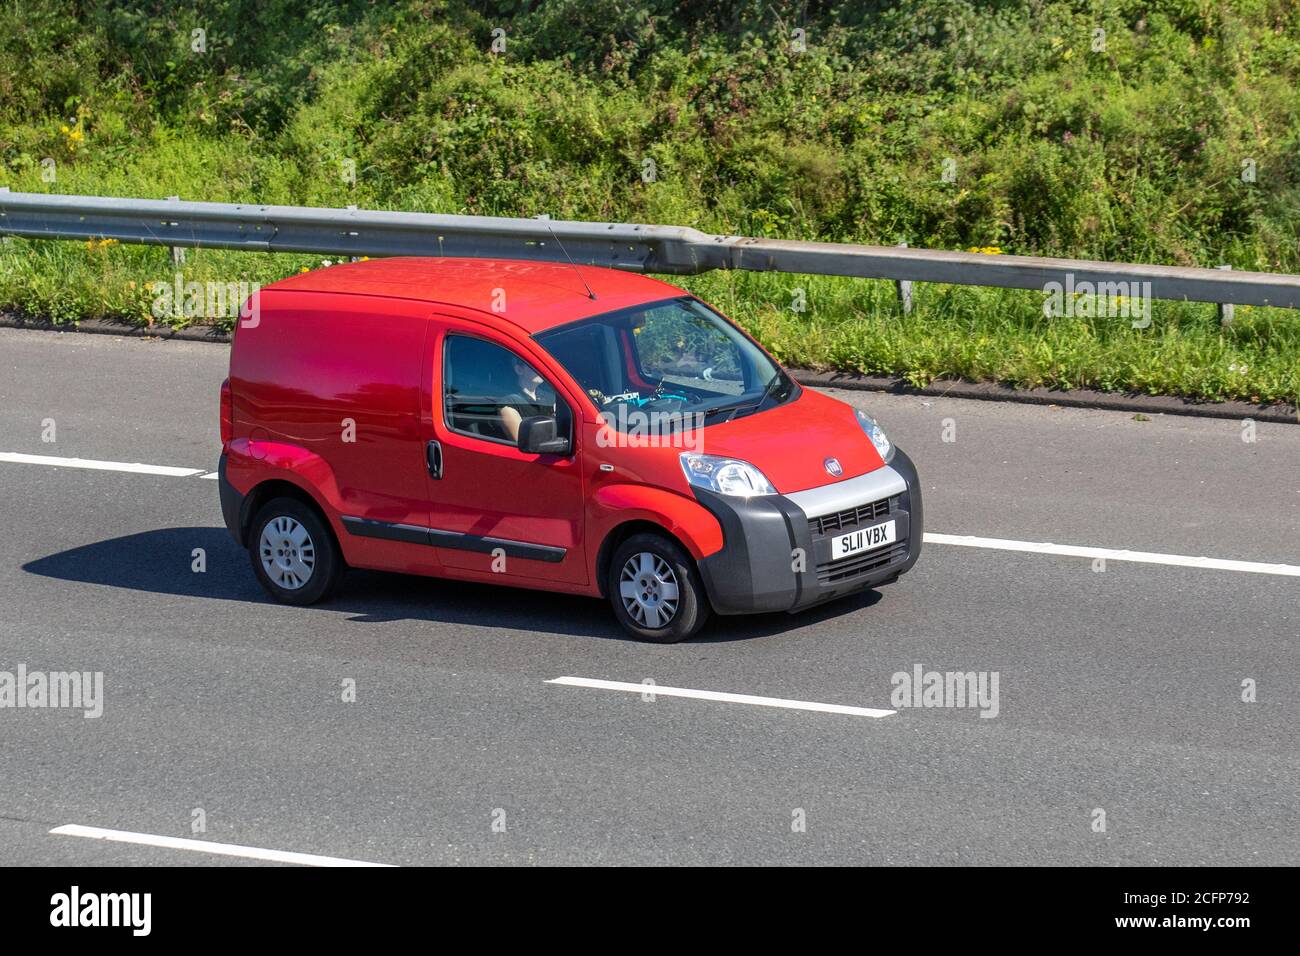 Vehicular traffic moving vehicles, cars driving vehicle on UK roads, motors, motoring on the M6 motorway highway network. Stock Photo